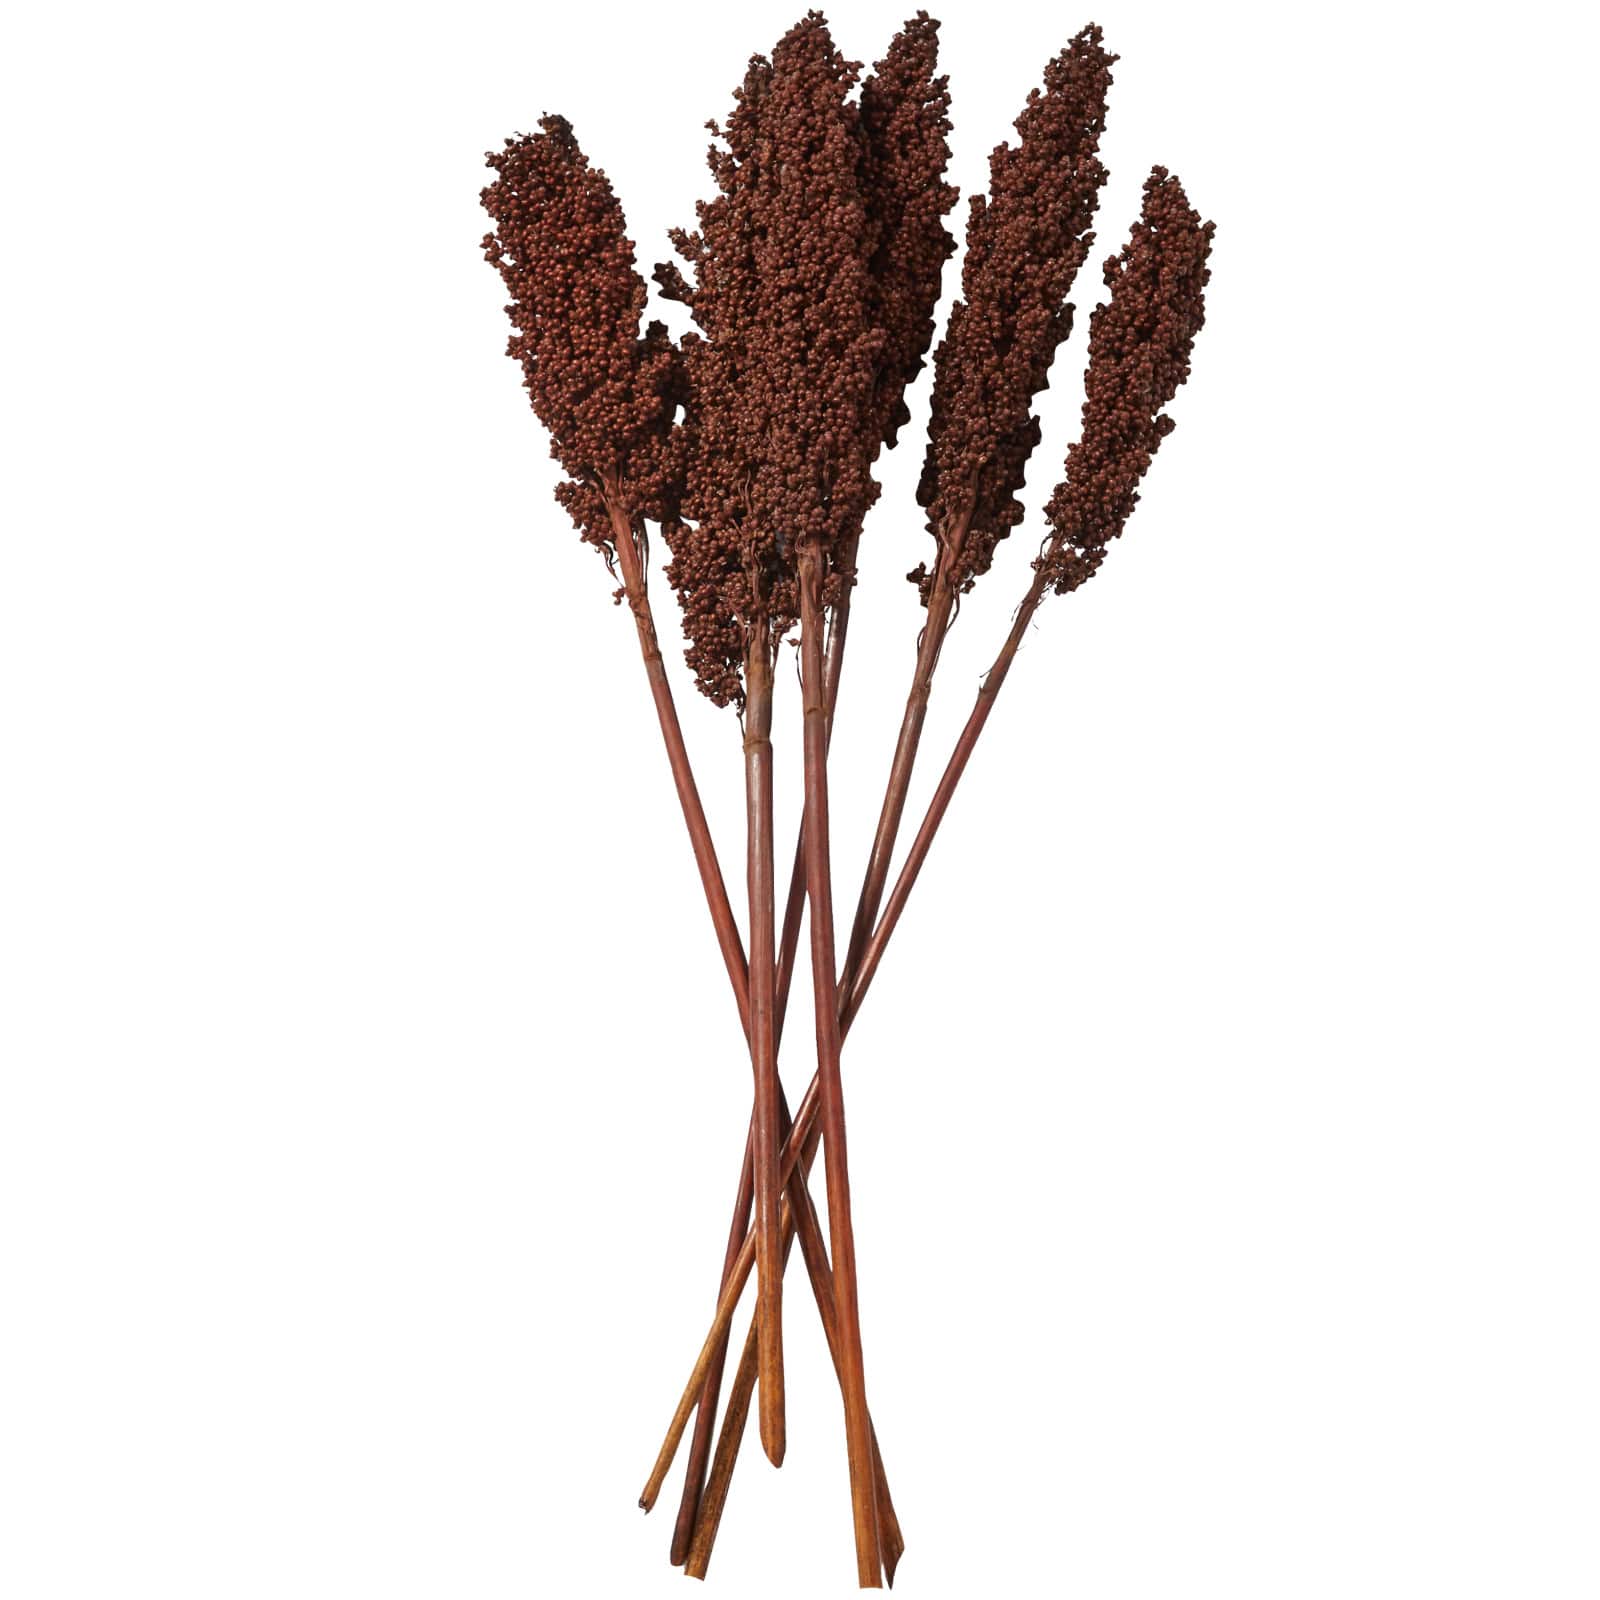 Dried Corn Maize Natural Foliage with Long Stems